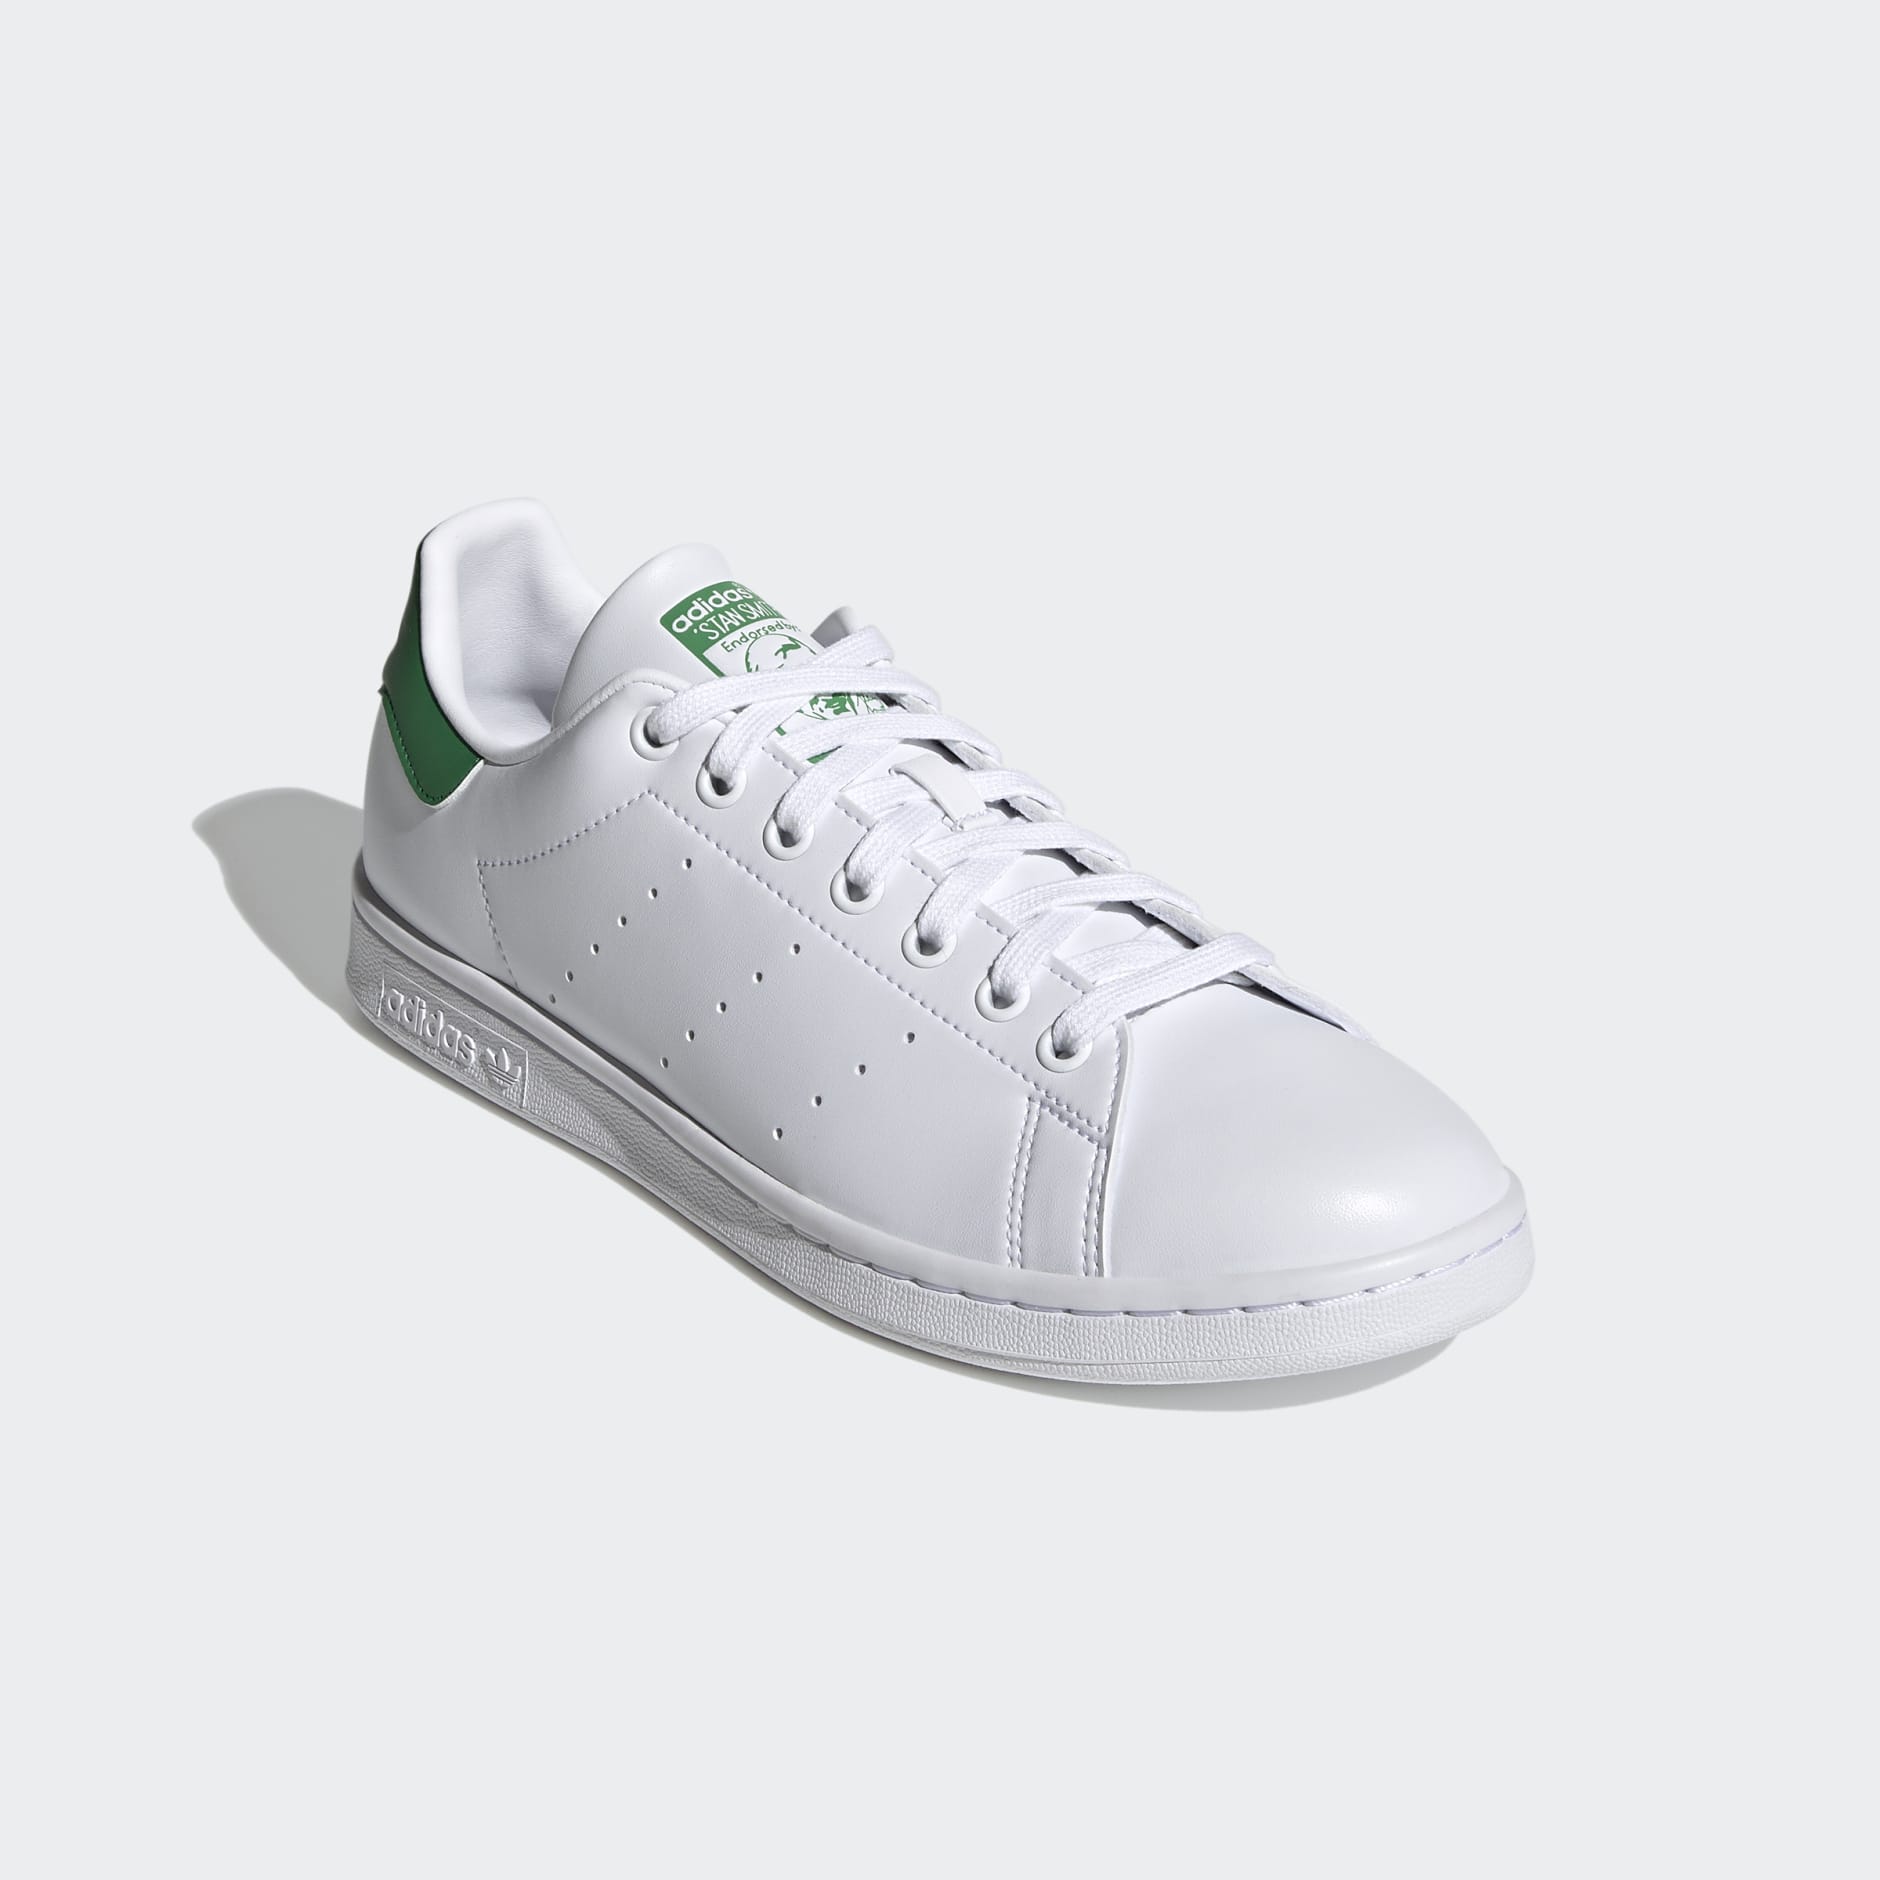 adidas Stan Smith, Sneakers for men and women